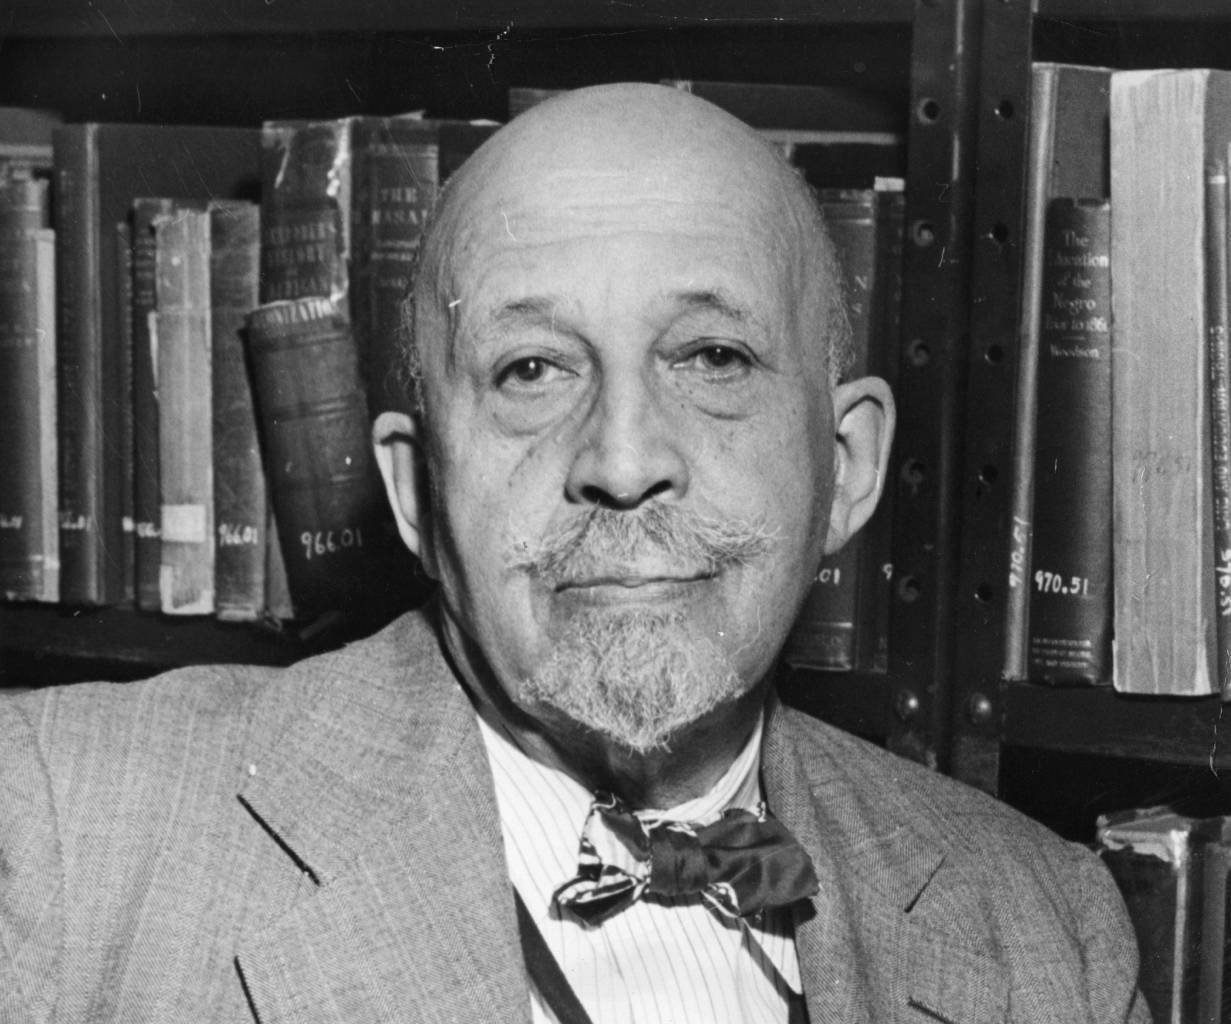 Dr William Edward Burghardt Du Bois (1868 - 1963), 82-year old anthropologist and publicist, co-founder of the National Association for the Advancement of Coloured People (NAACP) who has been nominated as the American Labor Party candidate for Senator from New York. (Photo by Keystone/Getty Images)